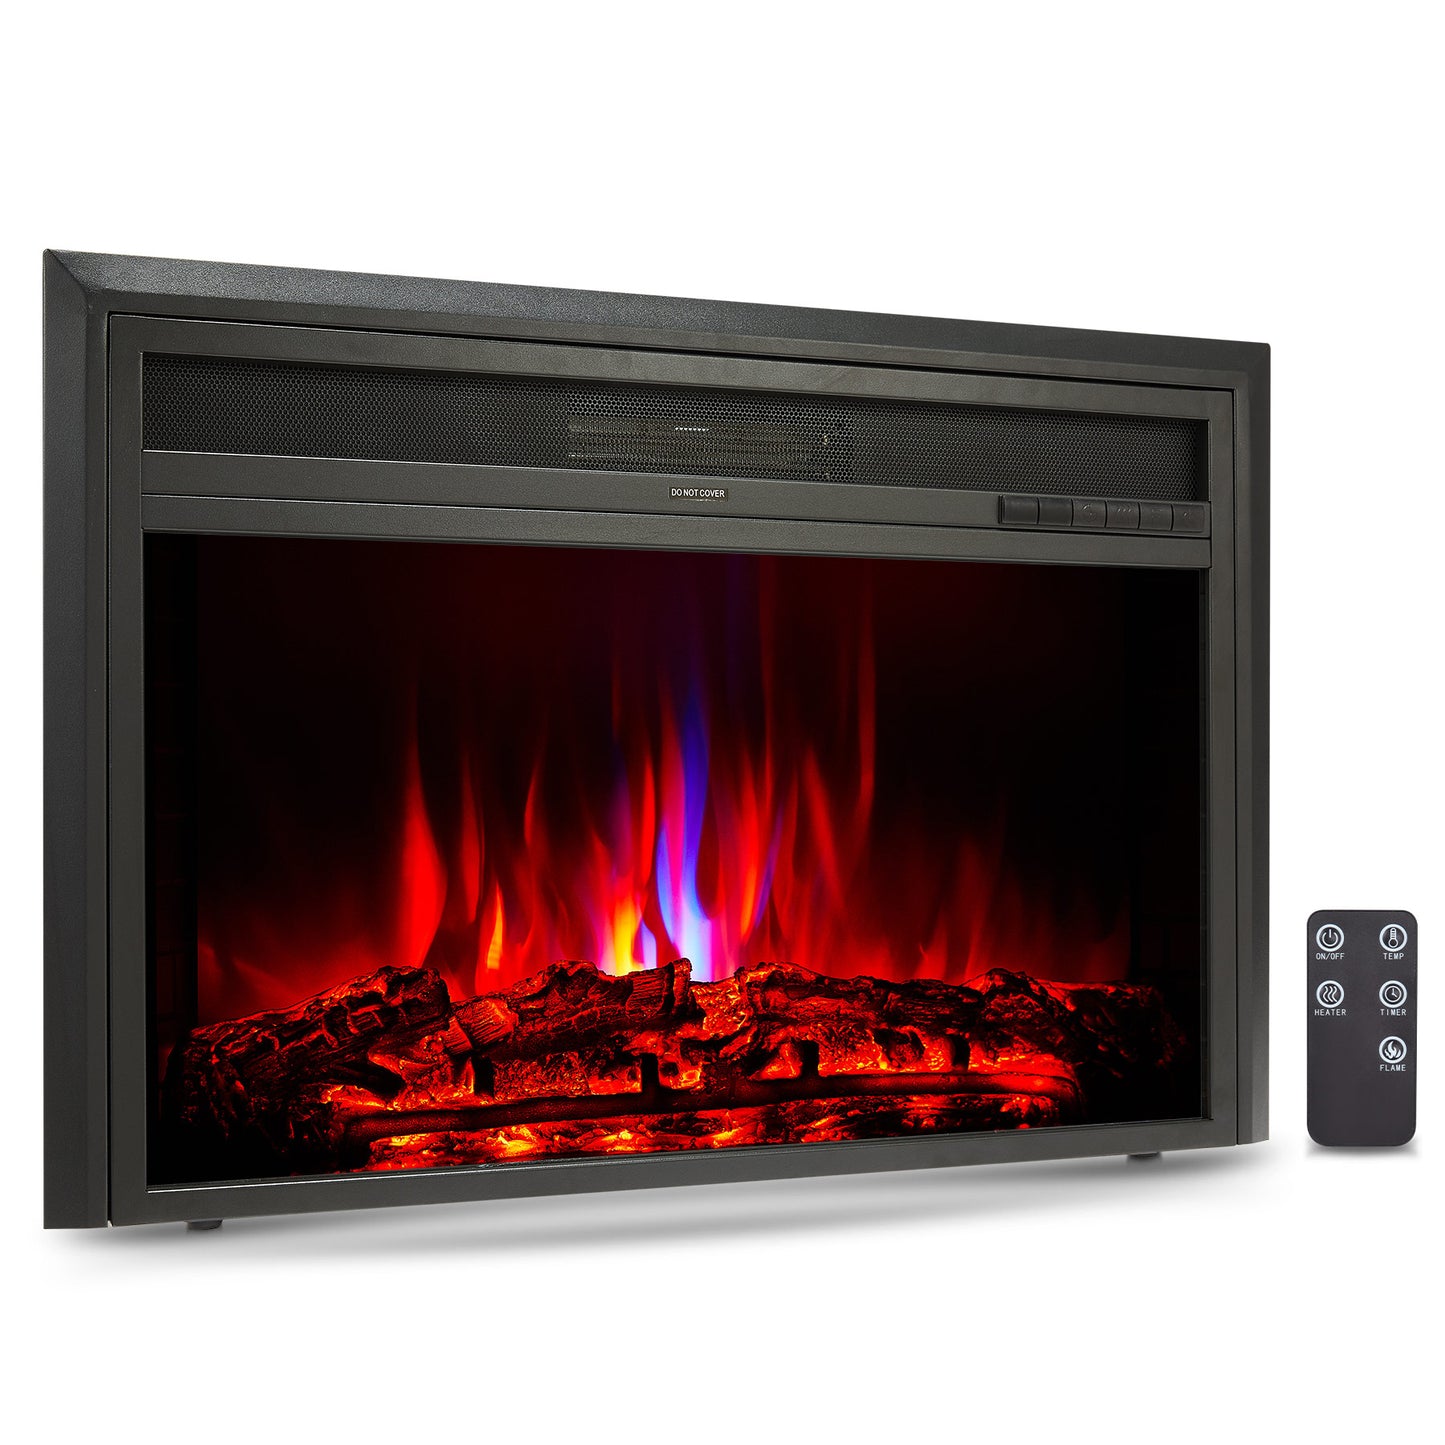 32" Recessed Electric Heater Fireplace With 6 Flame Effects